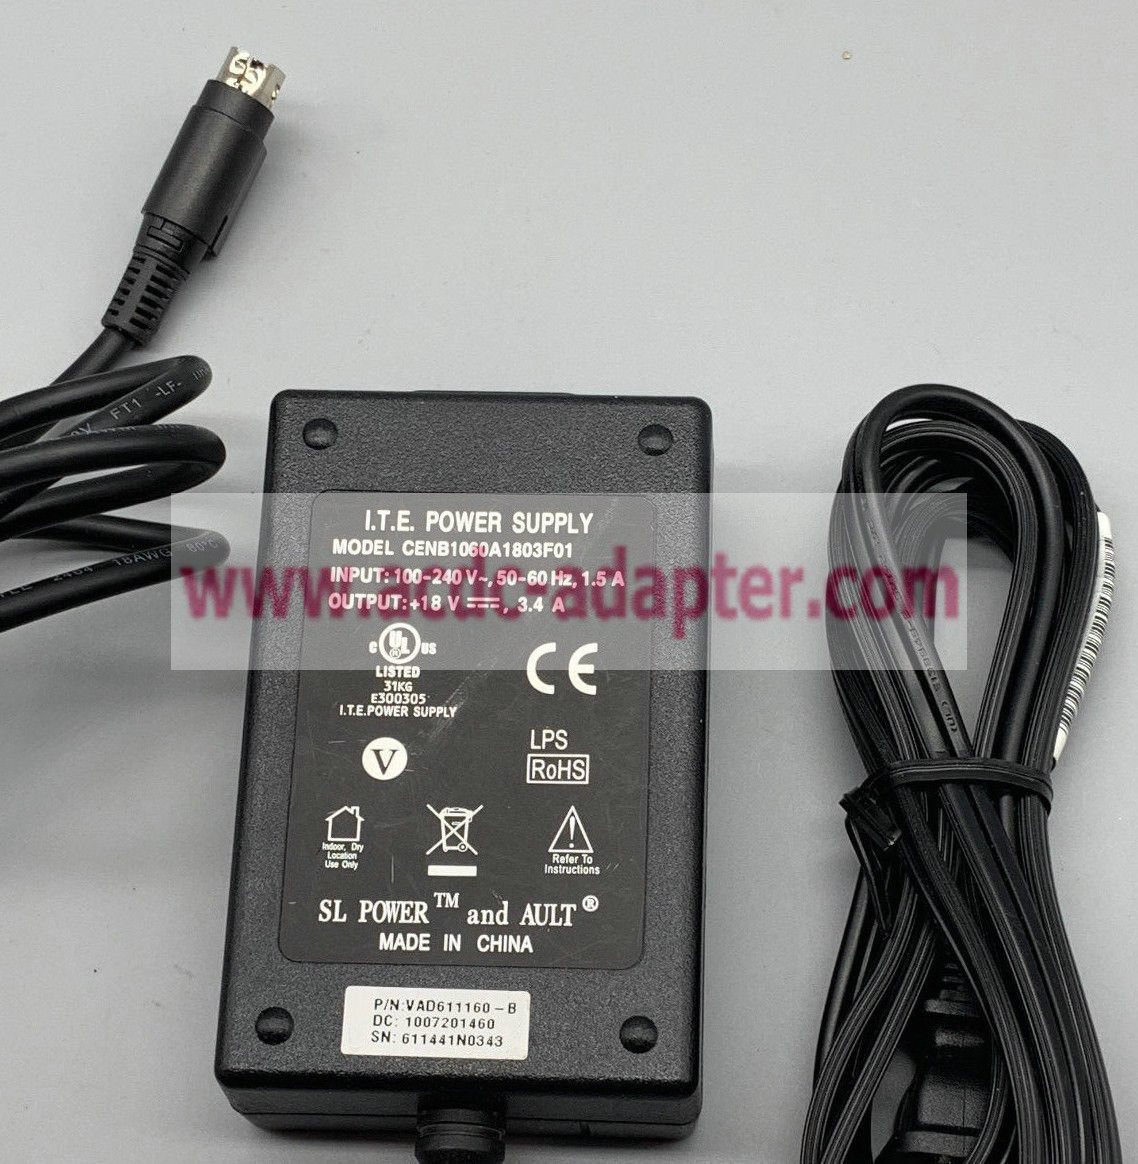 NEW ITE CENB1060A1803F01 18V 3.4A Switching Power Supply AC Adapter 4 PIN - Click Image to Close